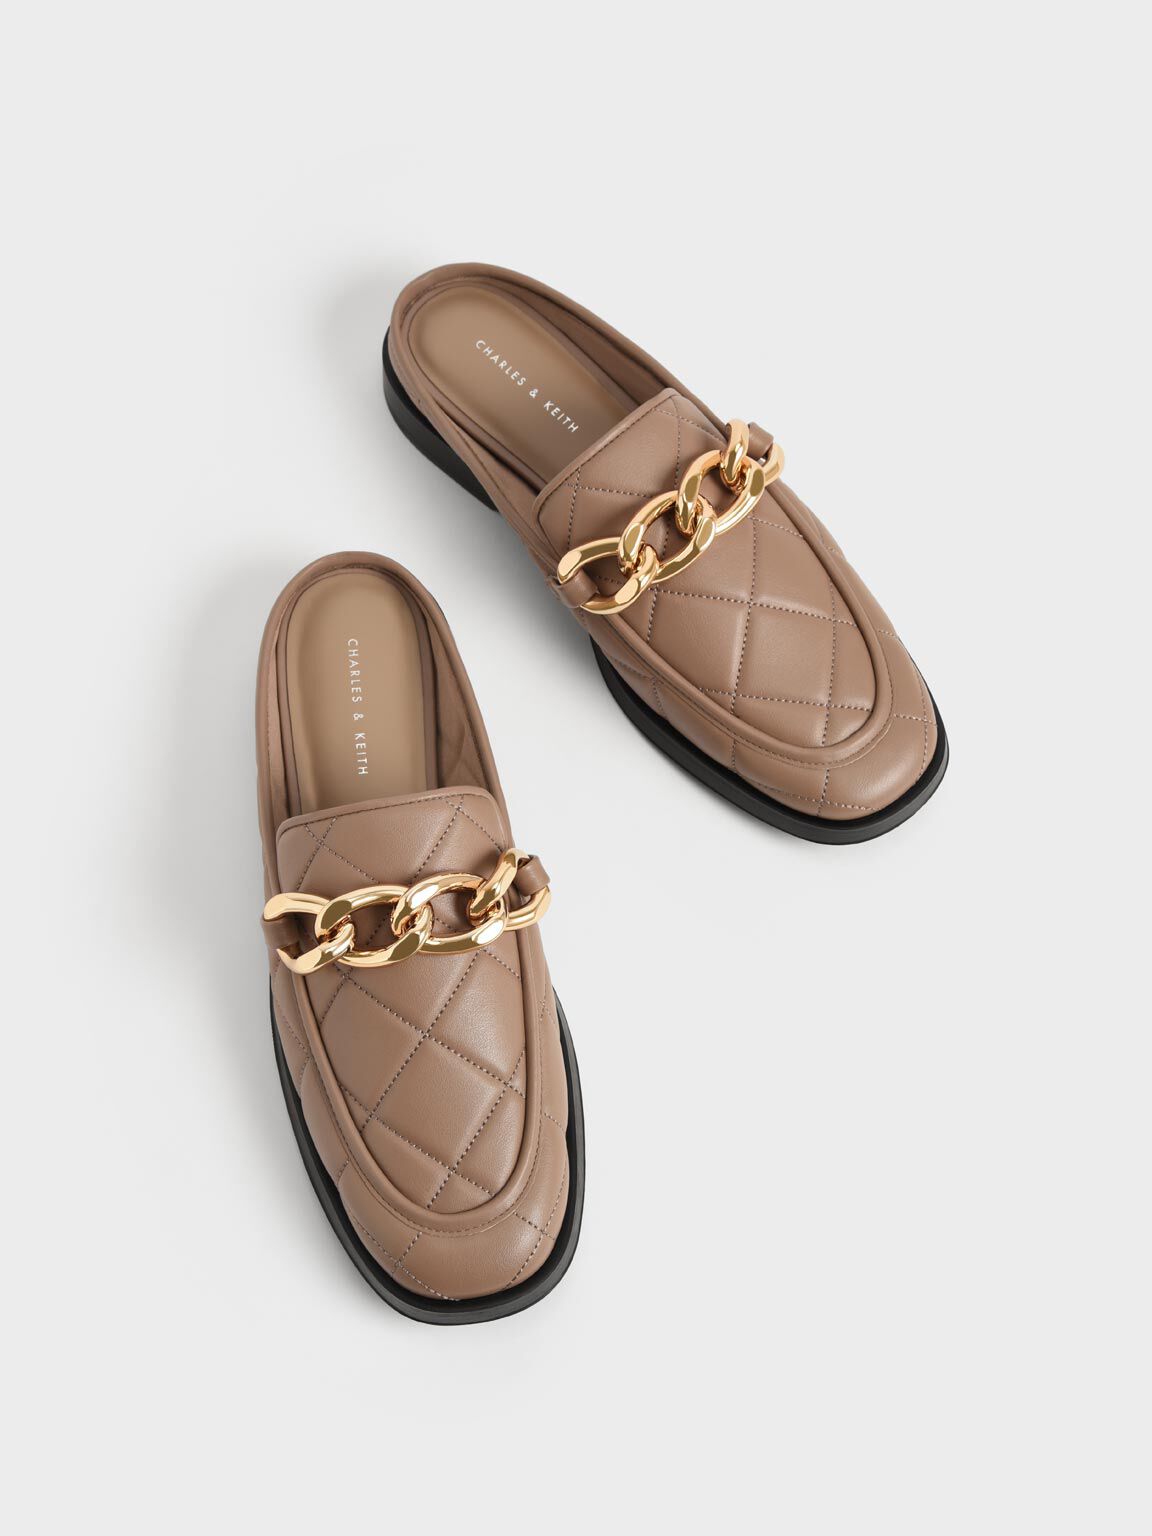 Quilted Chain Loafer Mules, Camel, hi-res